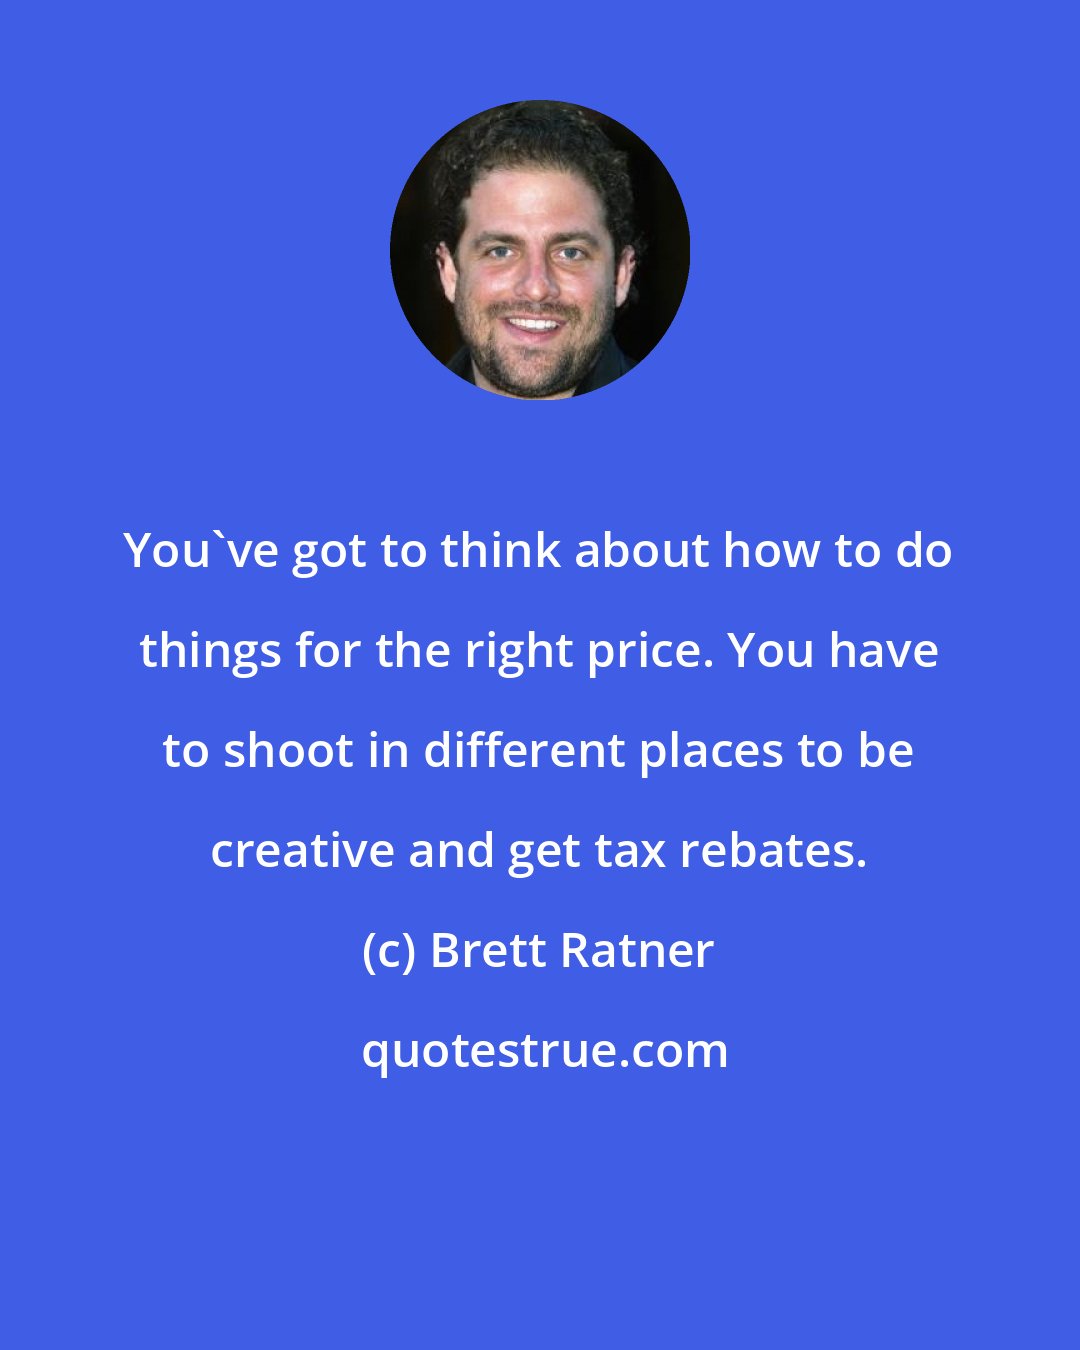 Brett Ratner: You've got to think about how to do things for the right price. You have to shoot in different places to be creative and get tax rebates.